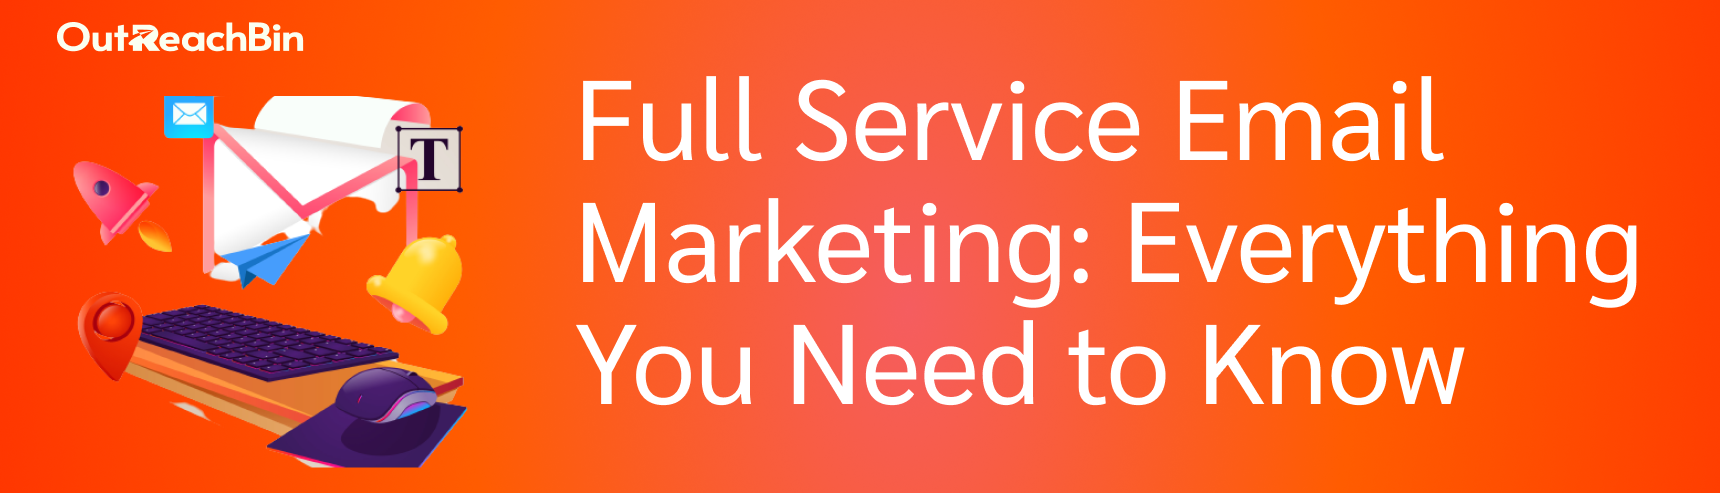 full service email marketing